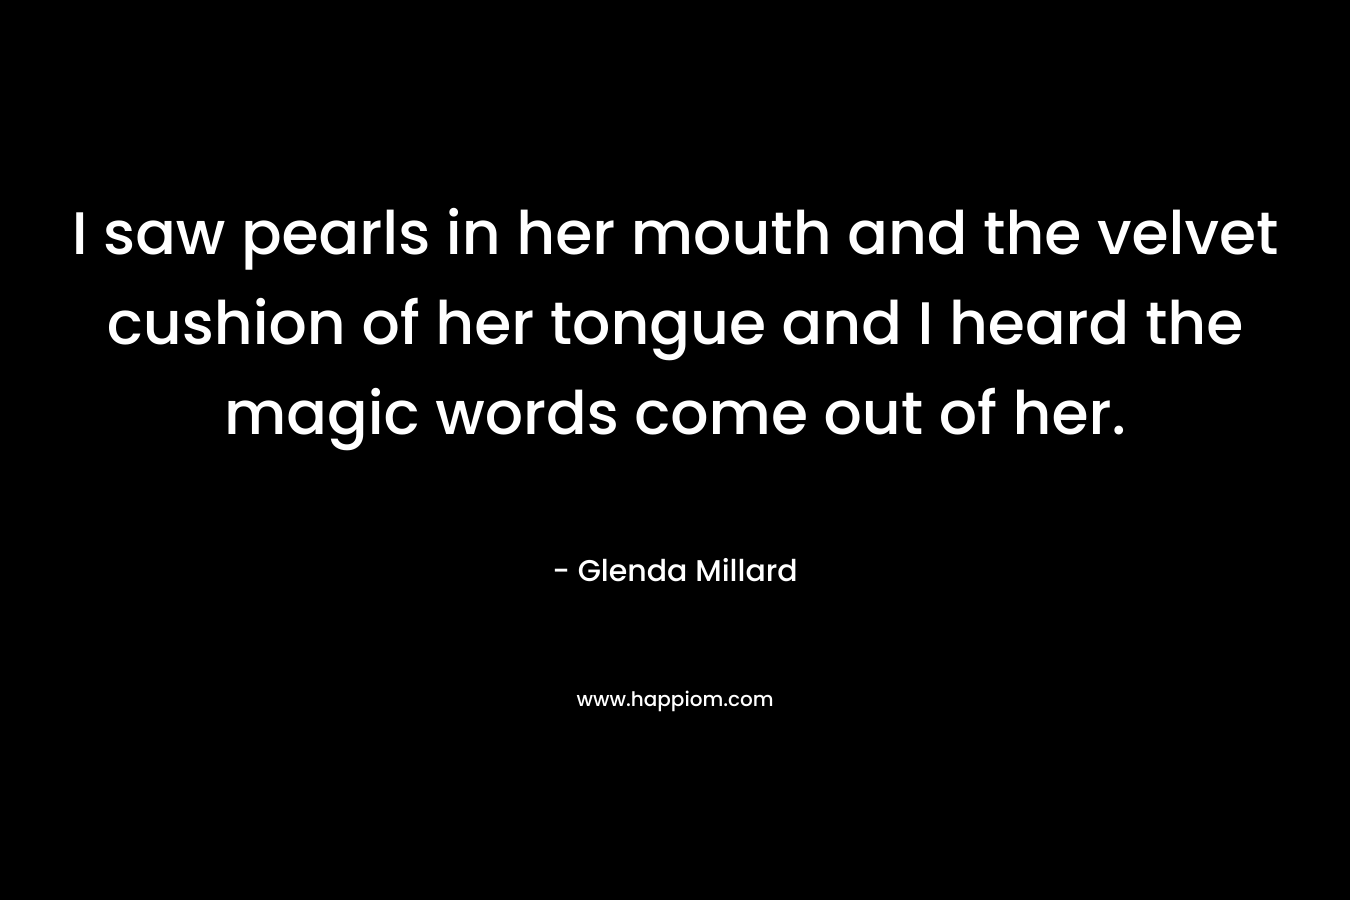 I saw pearls in her mouth and the velvet cushion of her tongue and I heard the magic words come out of her.